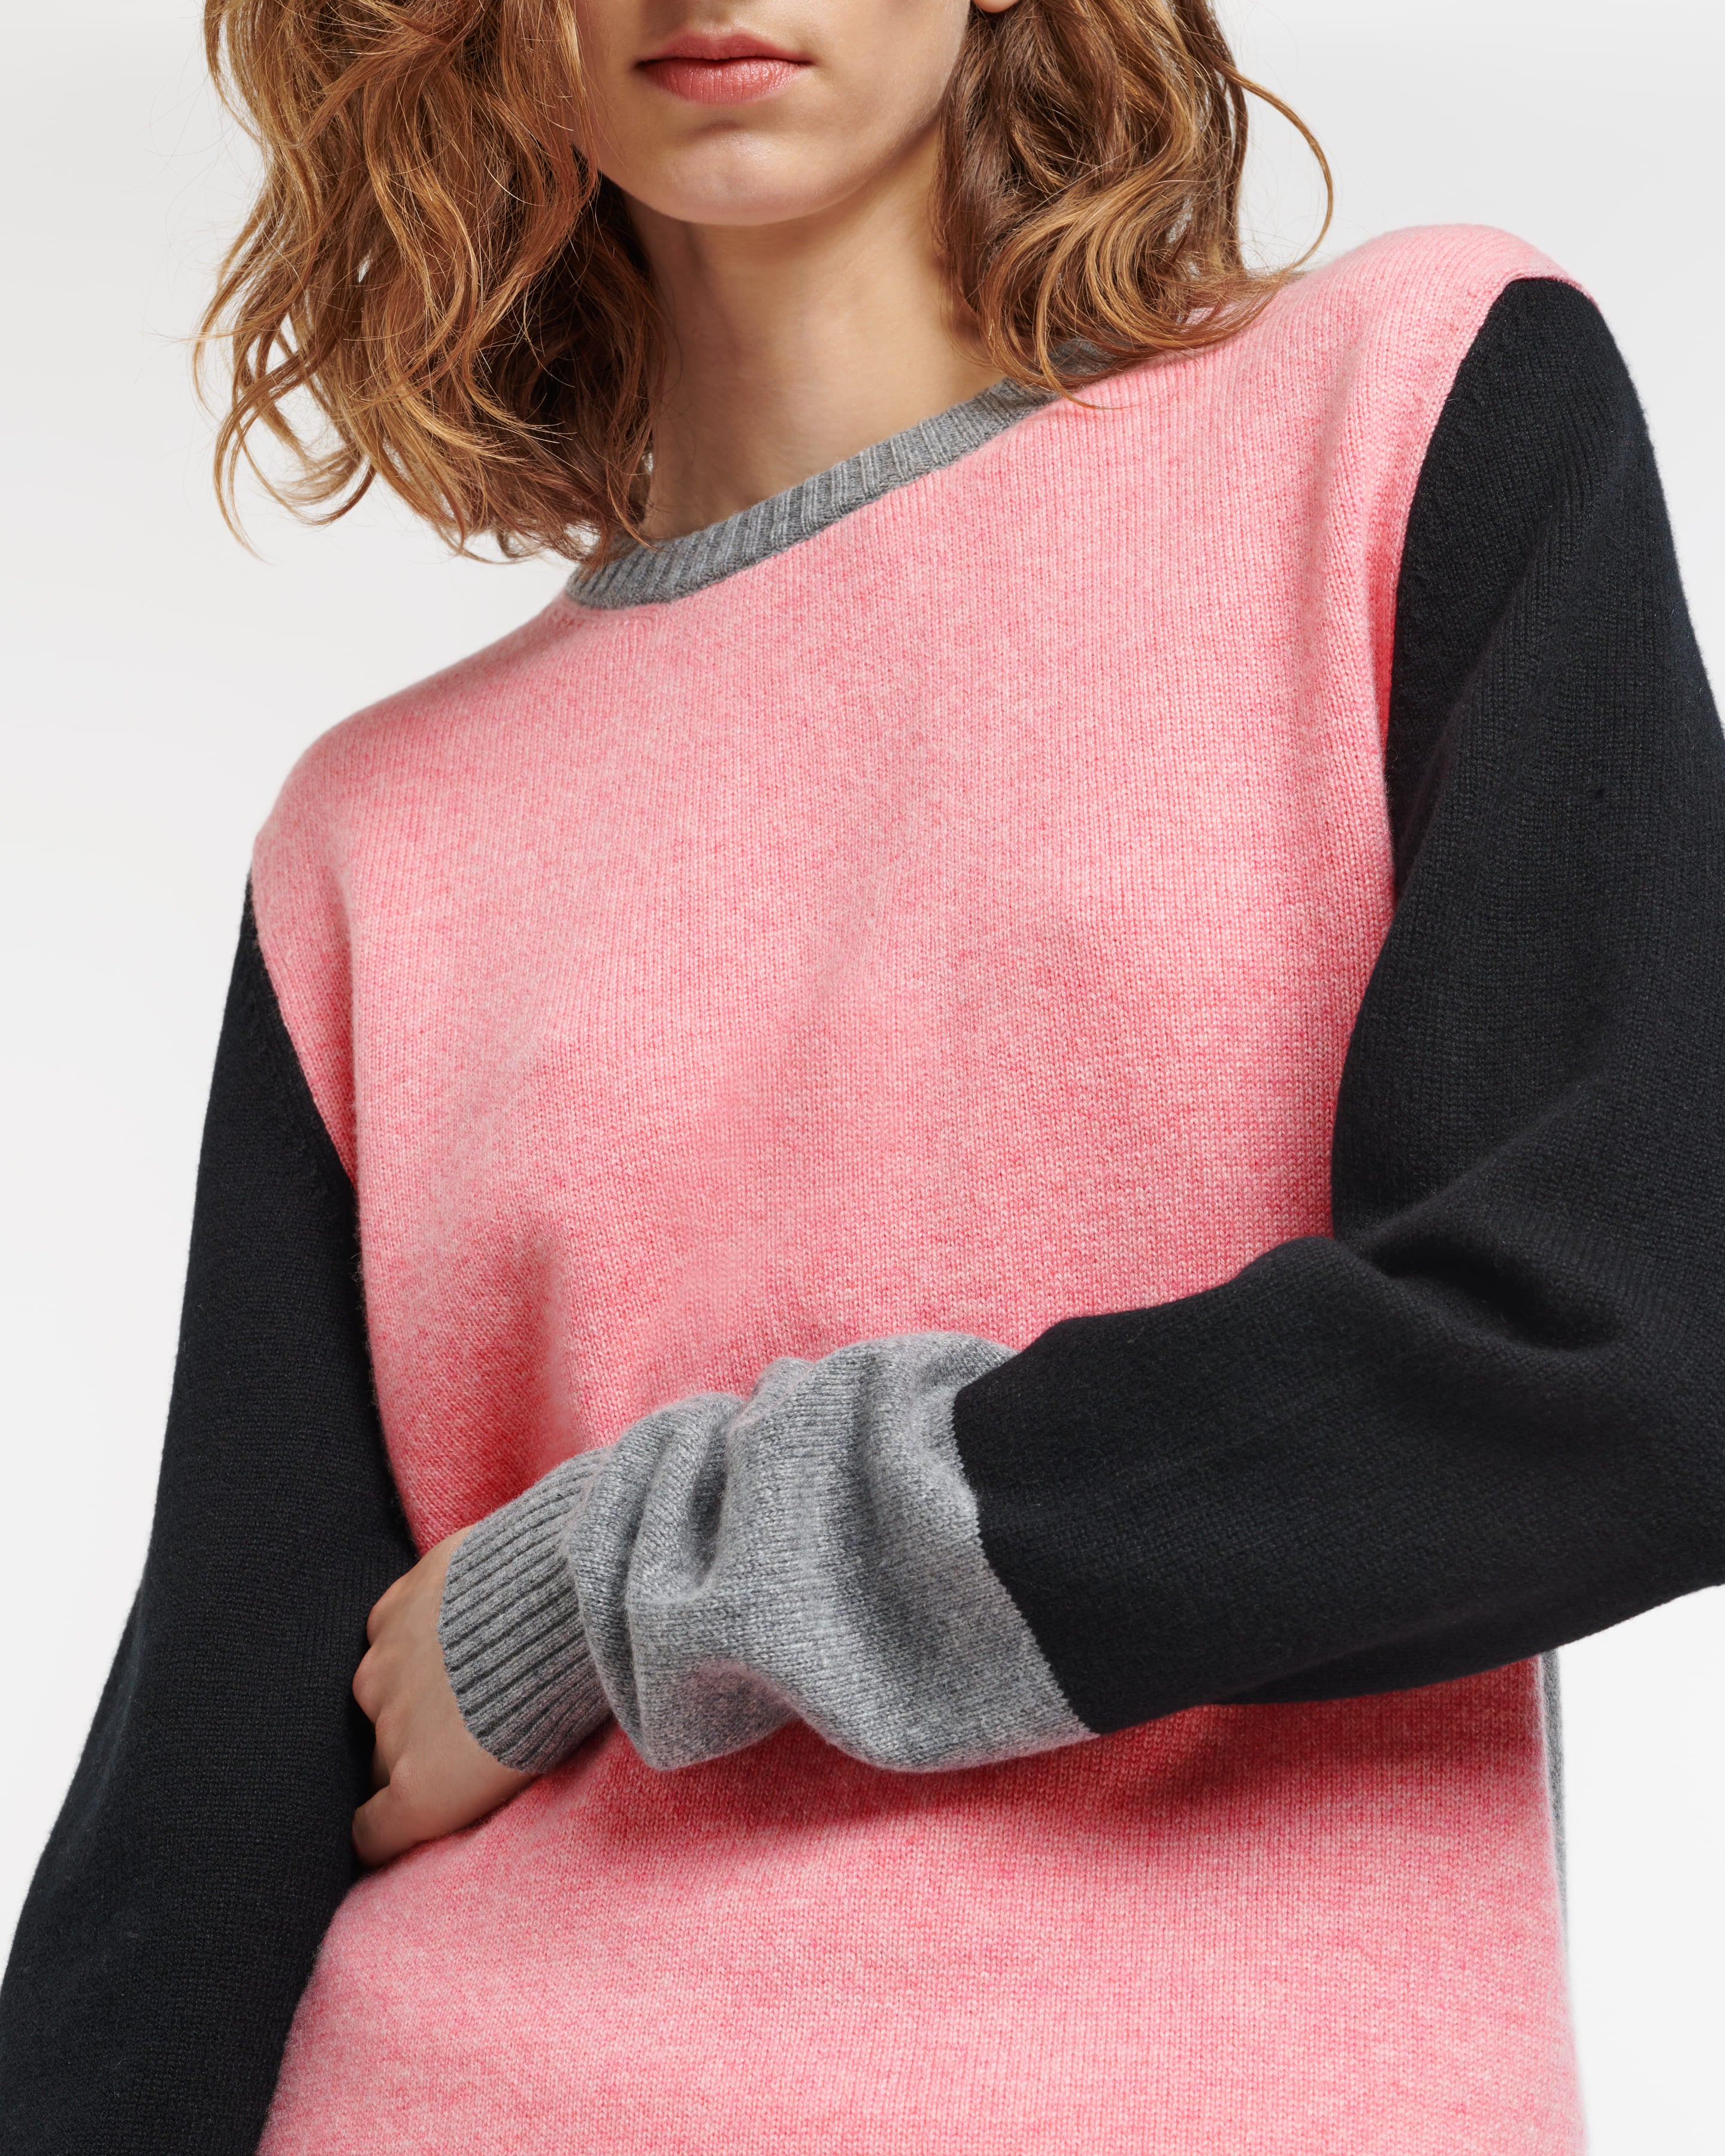 Sofia Coppola Gets Comfy In Cashmere For Barrie Collaboration - V